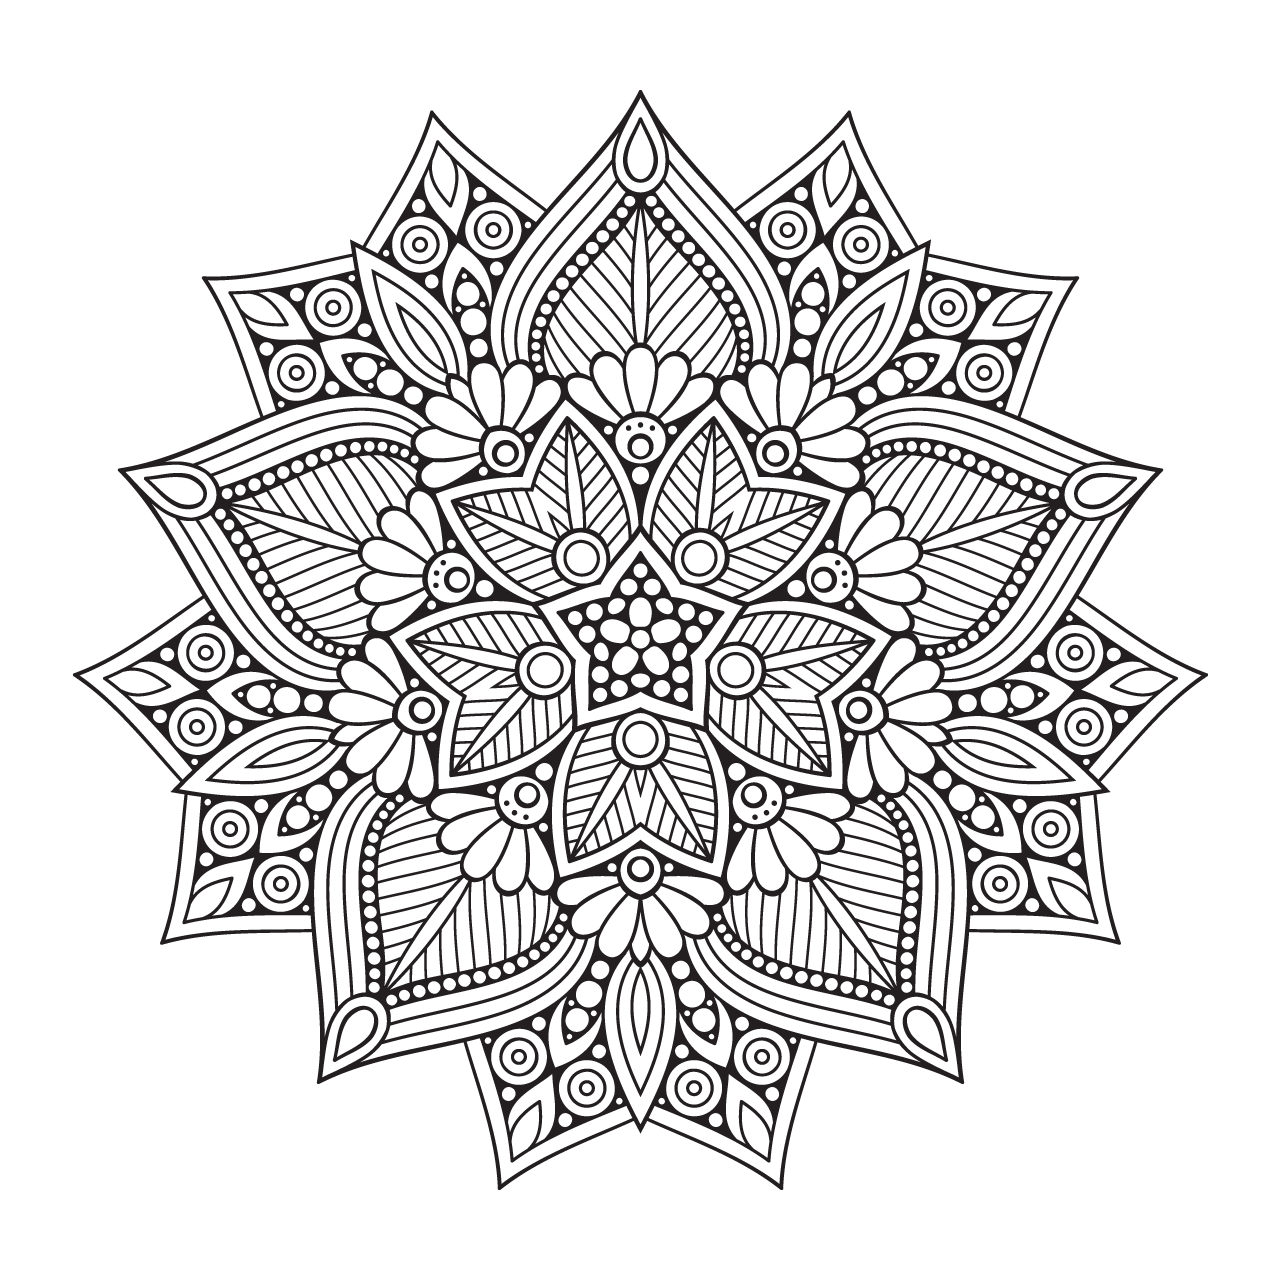 Outline mandala clipart coloring book decorative round ornament anti stress therapy pattern element yoga logo meditation